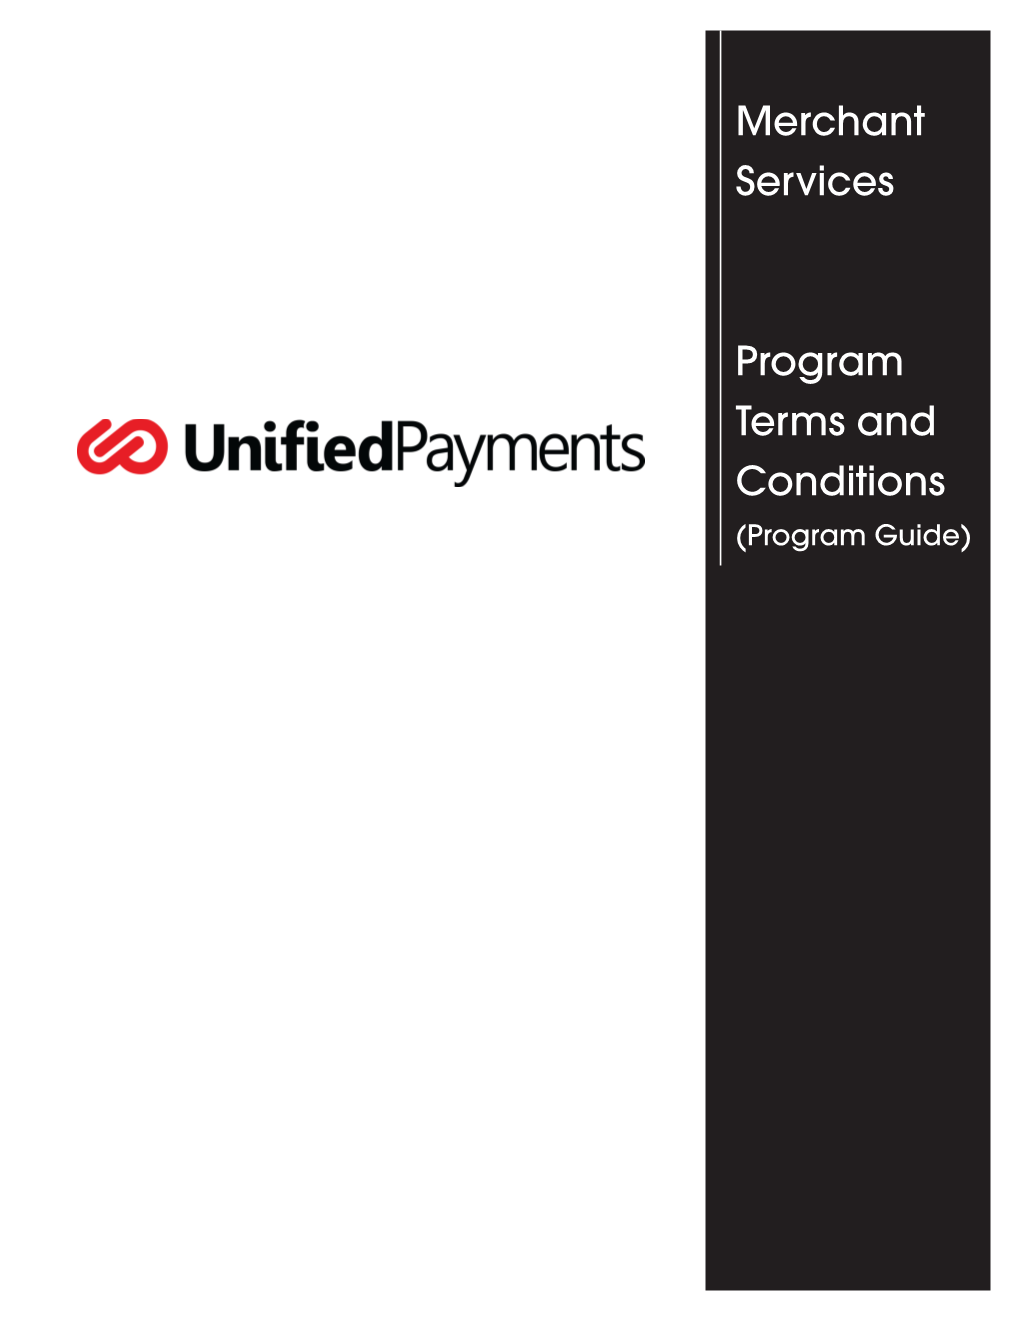 Merchant Services Program Terms and Conditions